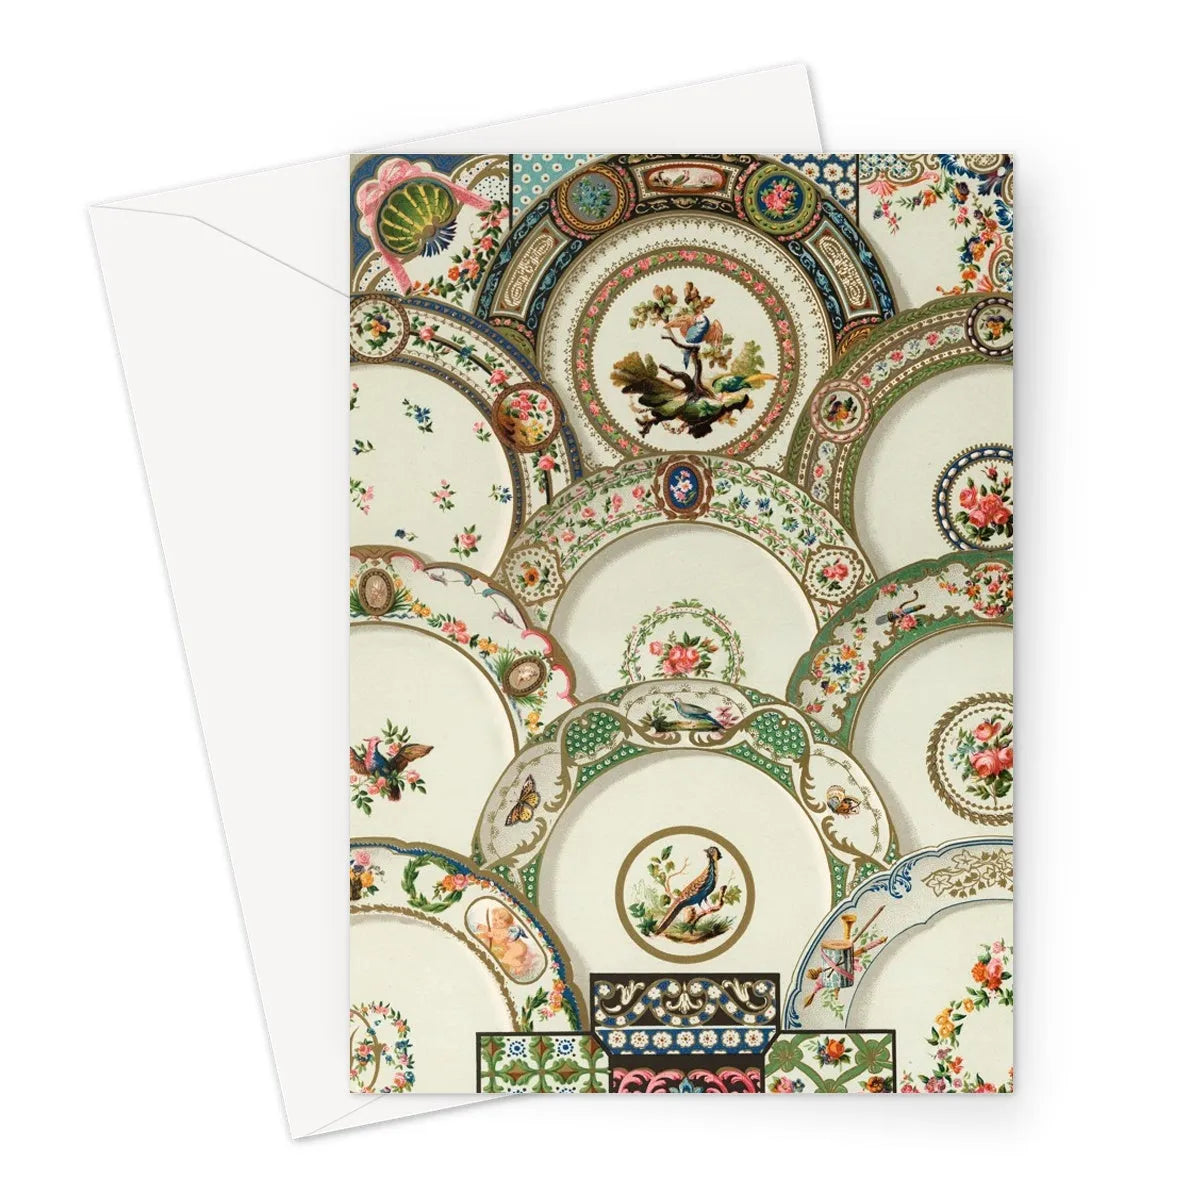 Decorative Plates By Auguste Racinet Greeting Card - A5 Portrait / 1 Card - Greeting & Note Cards - Aesthetic Art